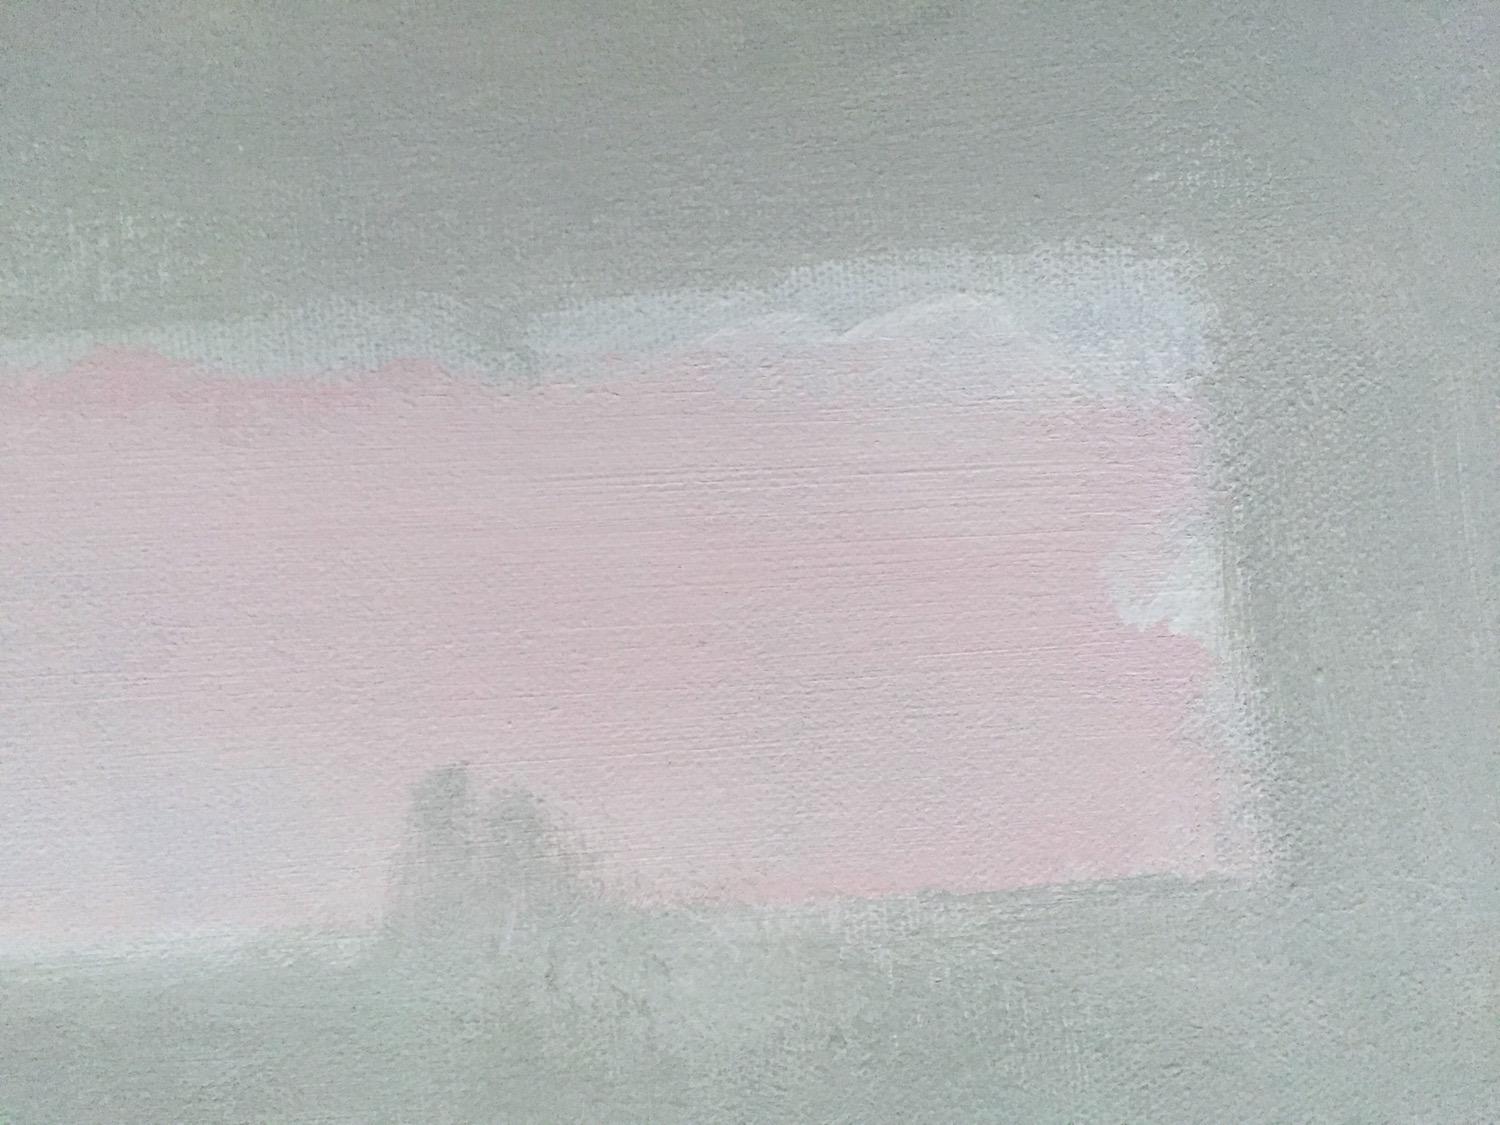 Layers of paint build up this soft grey palette where emphasis is placed on minimal composition. From a distance, the painting explores colour fields and geometric abstraction. Closer up, it's about subtle textures, intuitive mark-making, playful